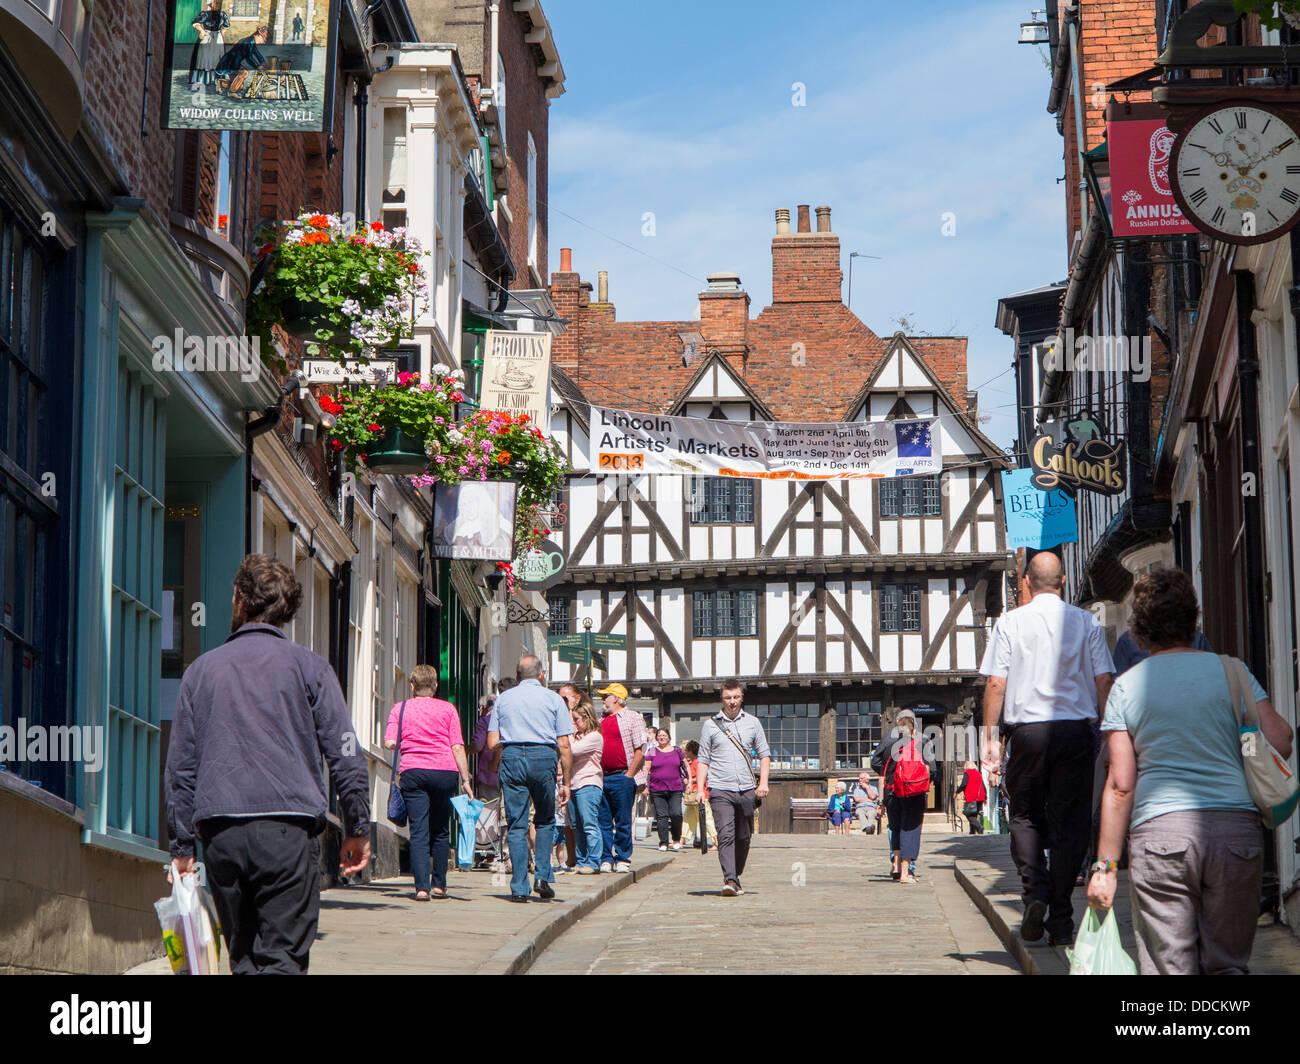 Steep Hill with people shopping and half-timbered building at top, Lincoln, England Stock Photo